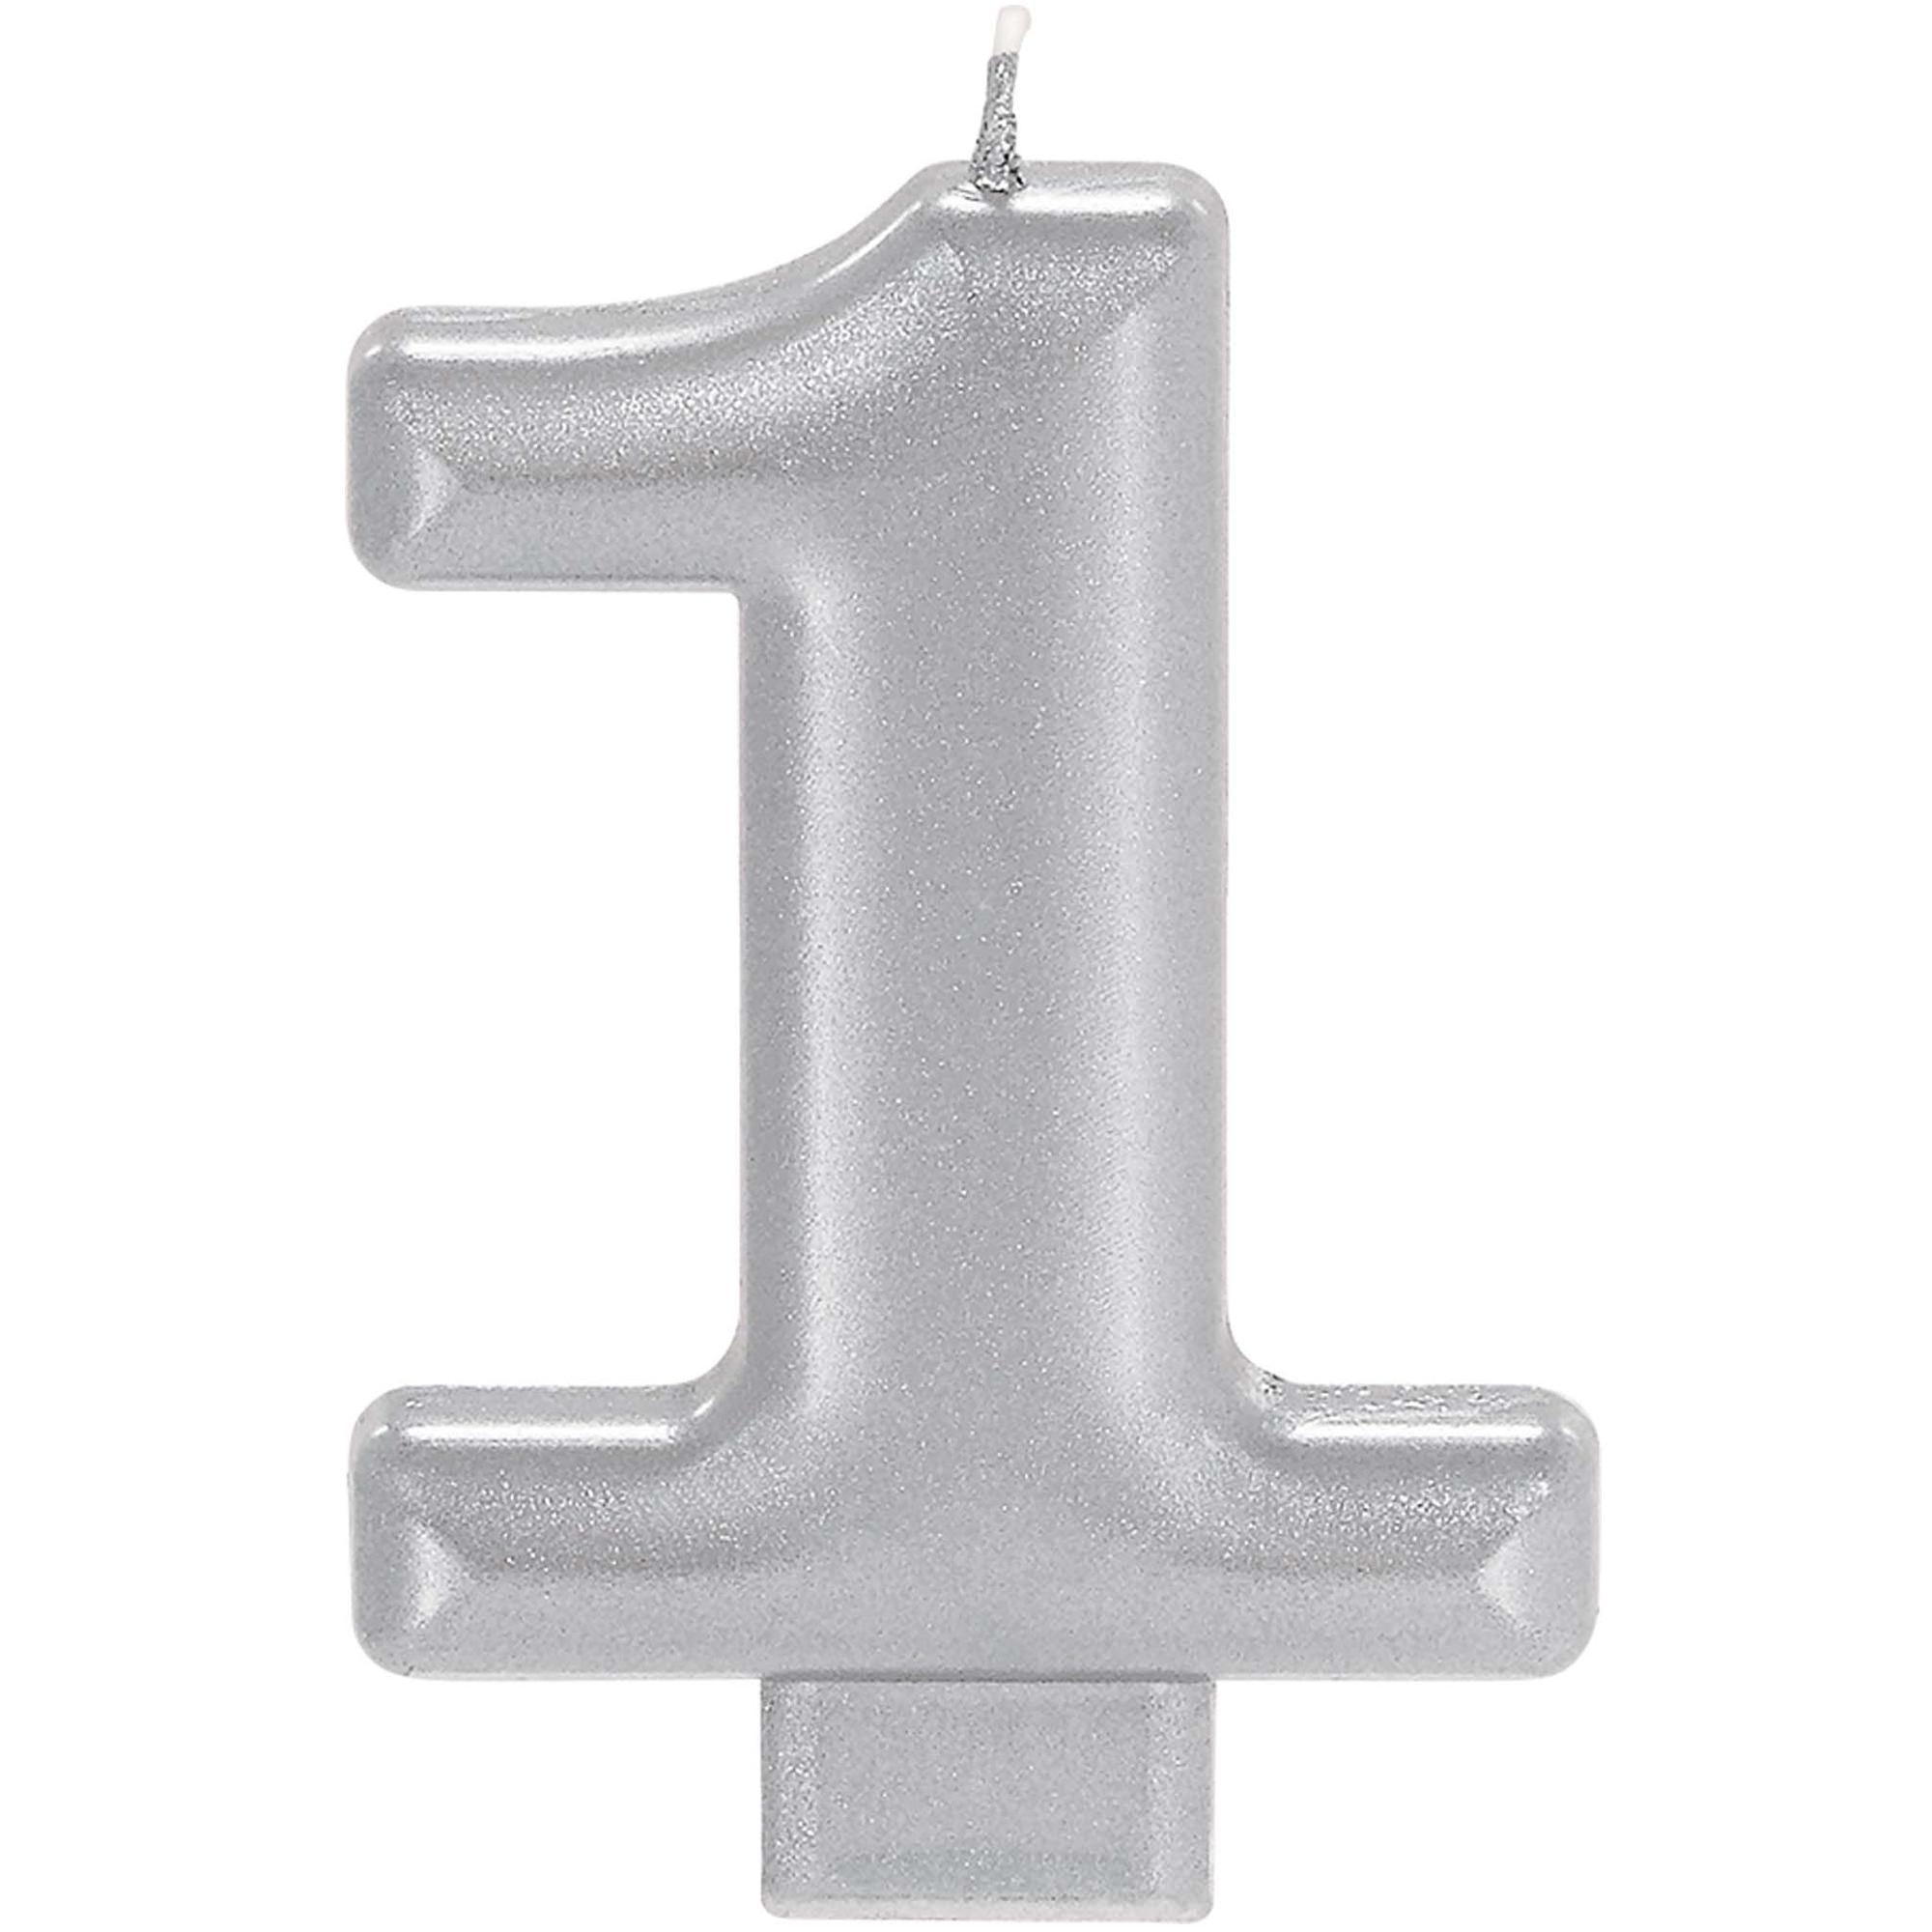 #1 Silver Numeral Metallic Candle Party Accessories - Party Centre - Party Centre